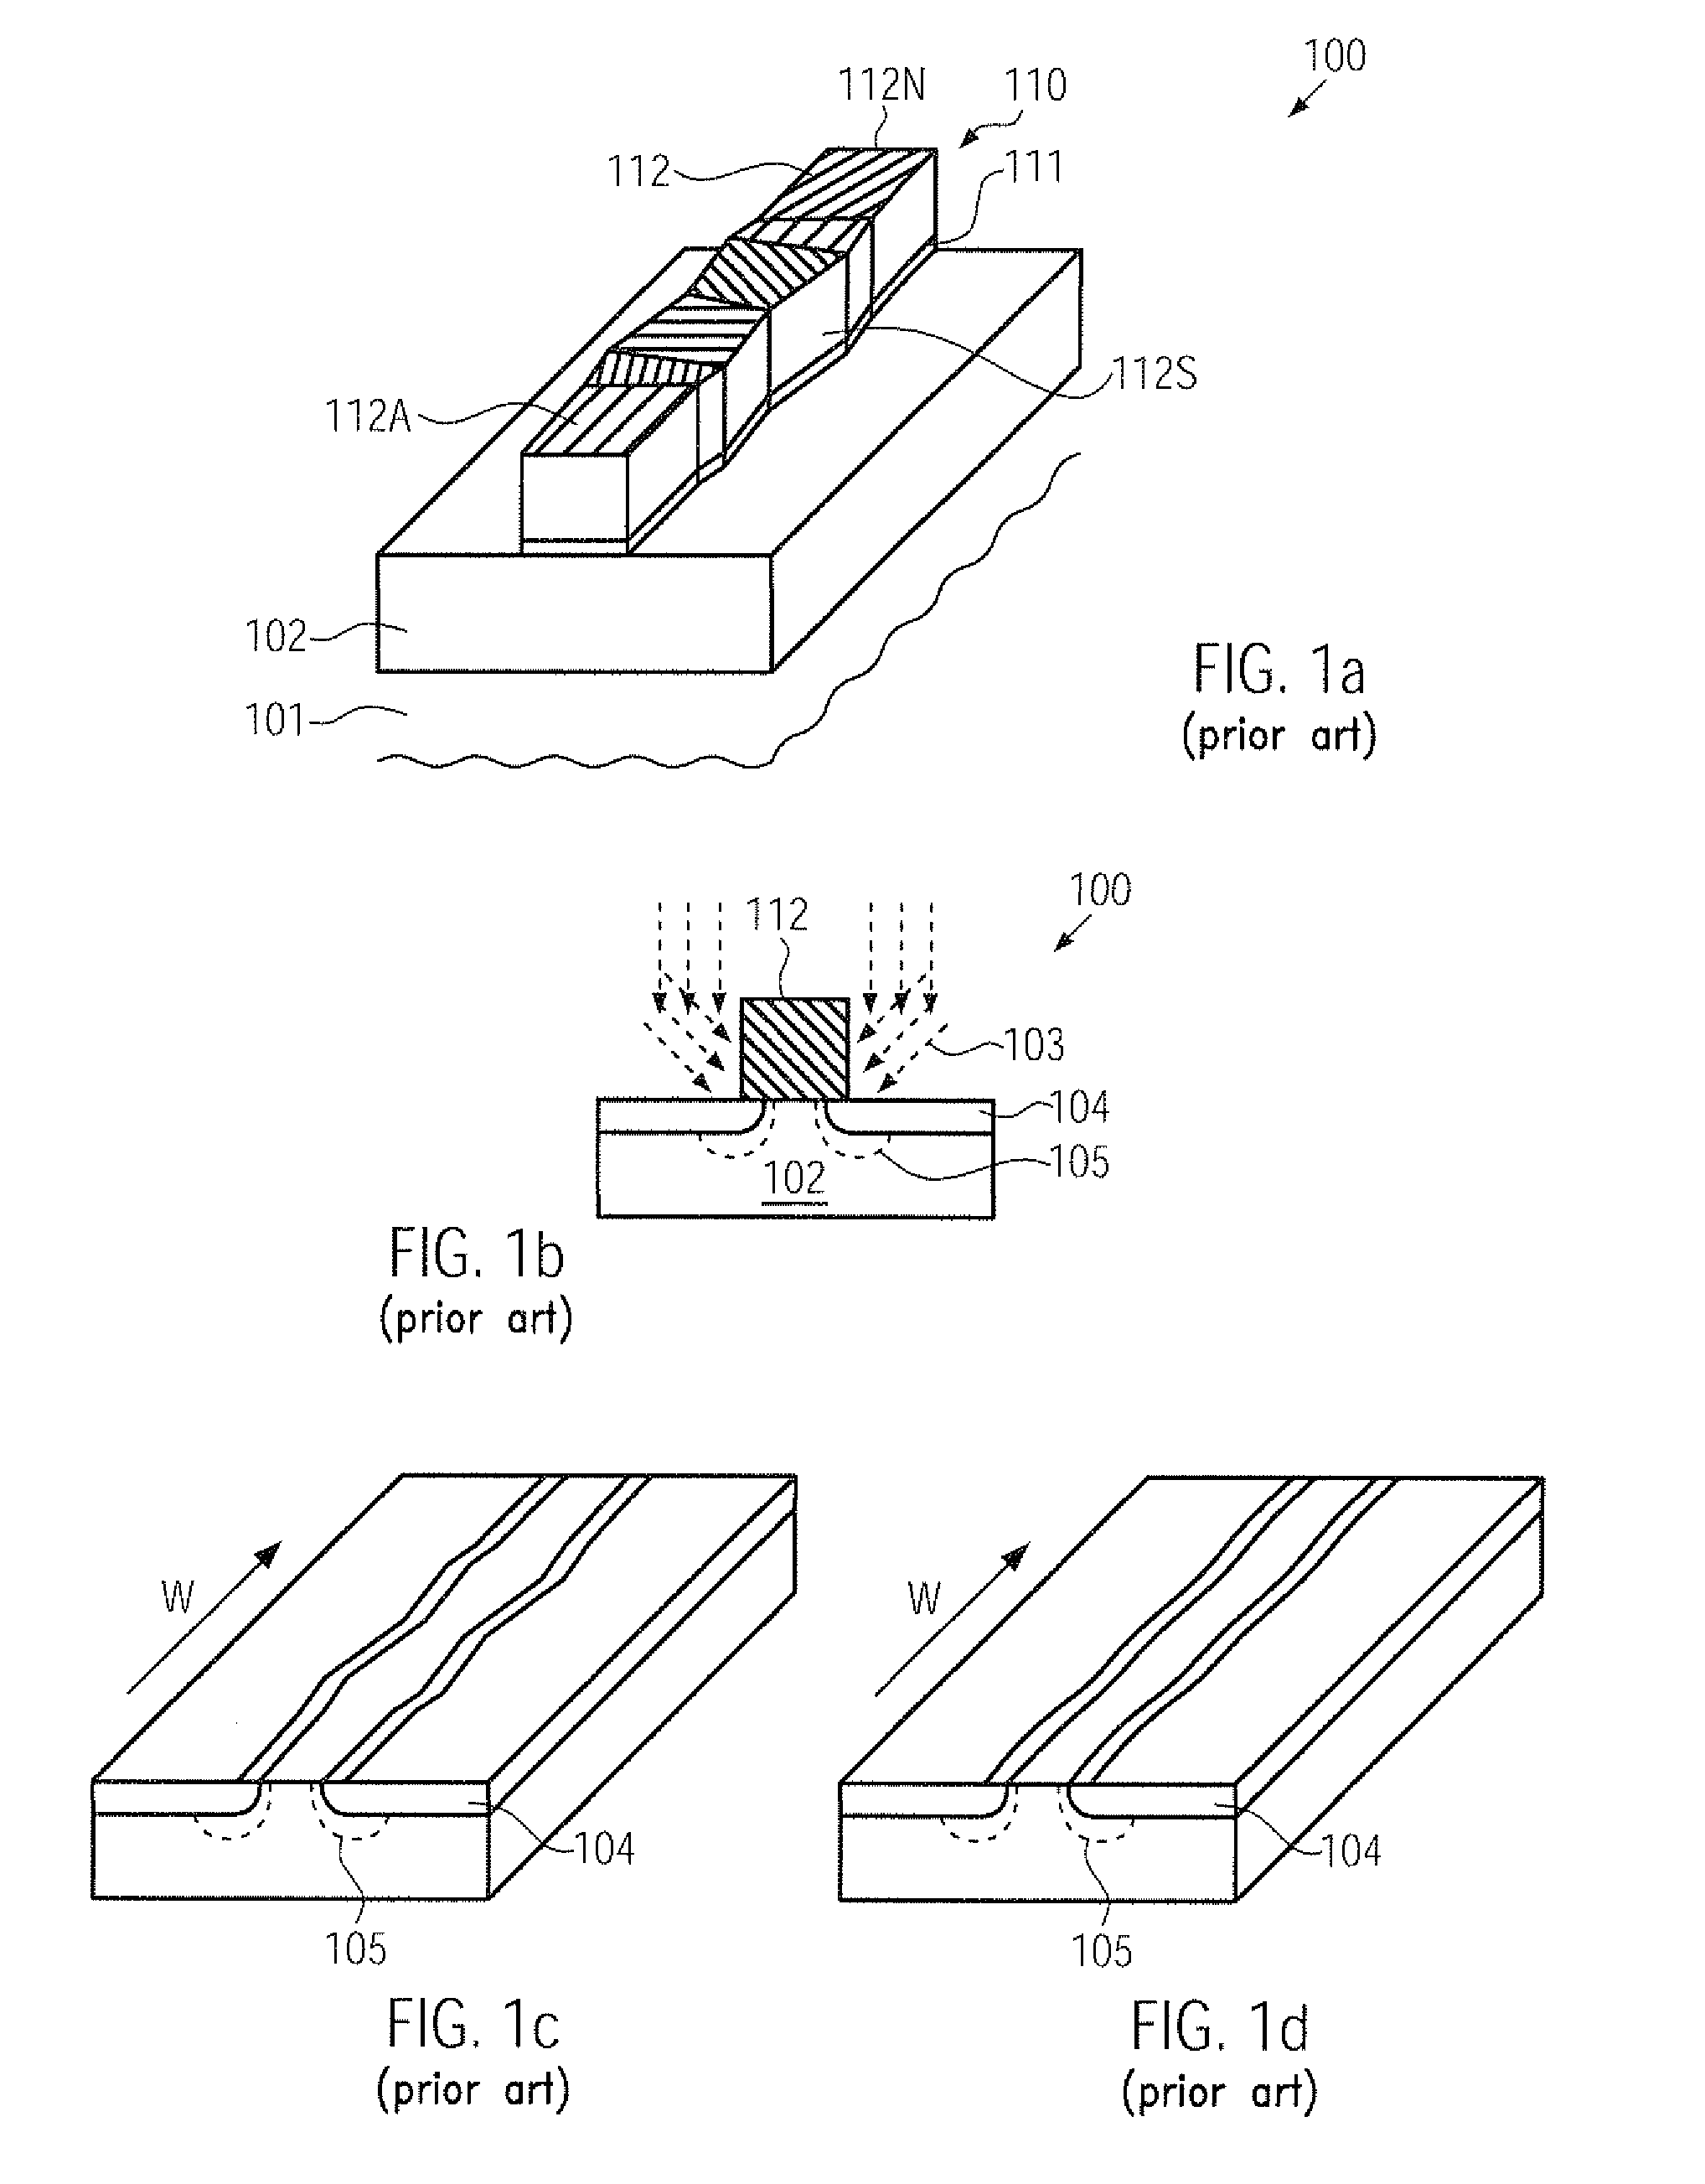 Short channel transistor with reduced length variation by using amorphous electrode material during implantation